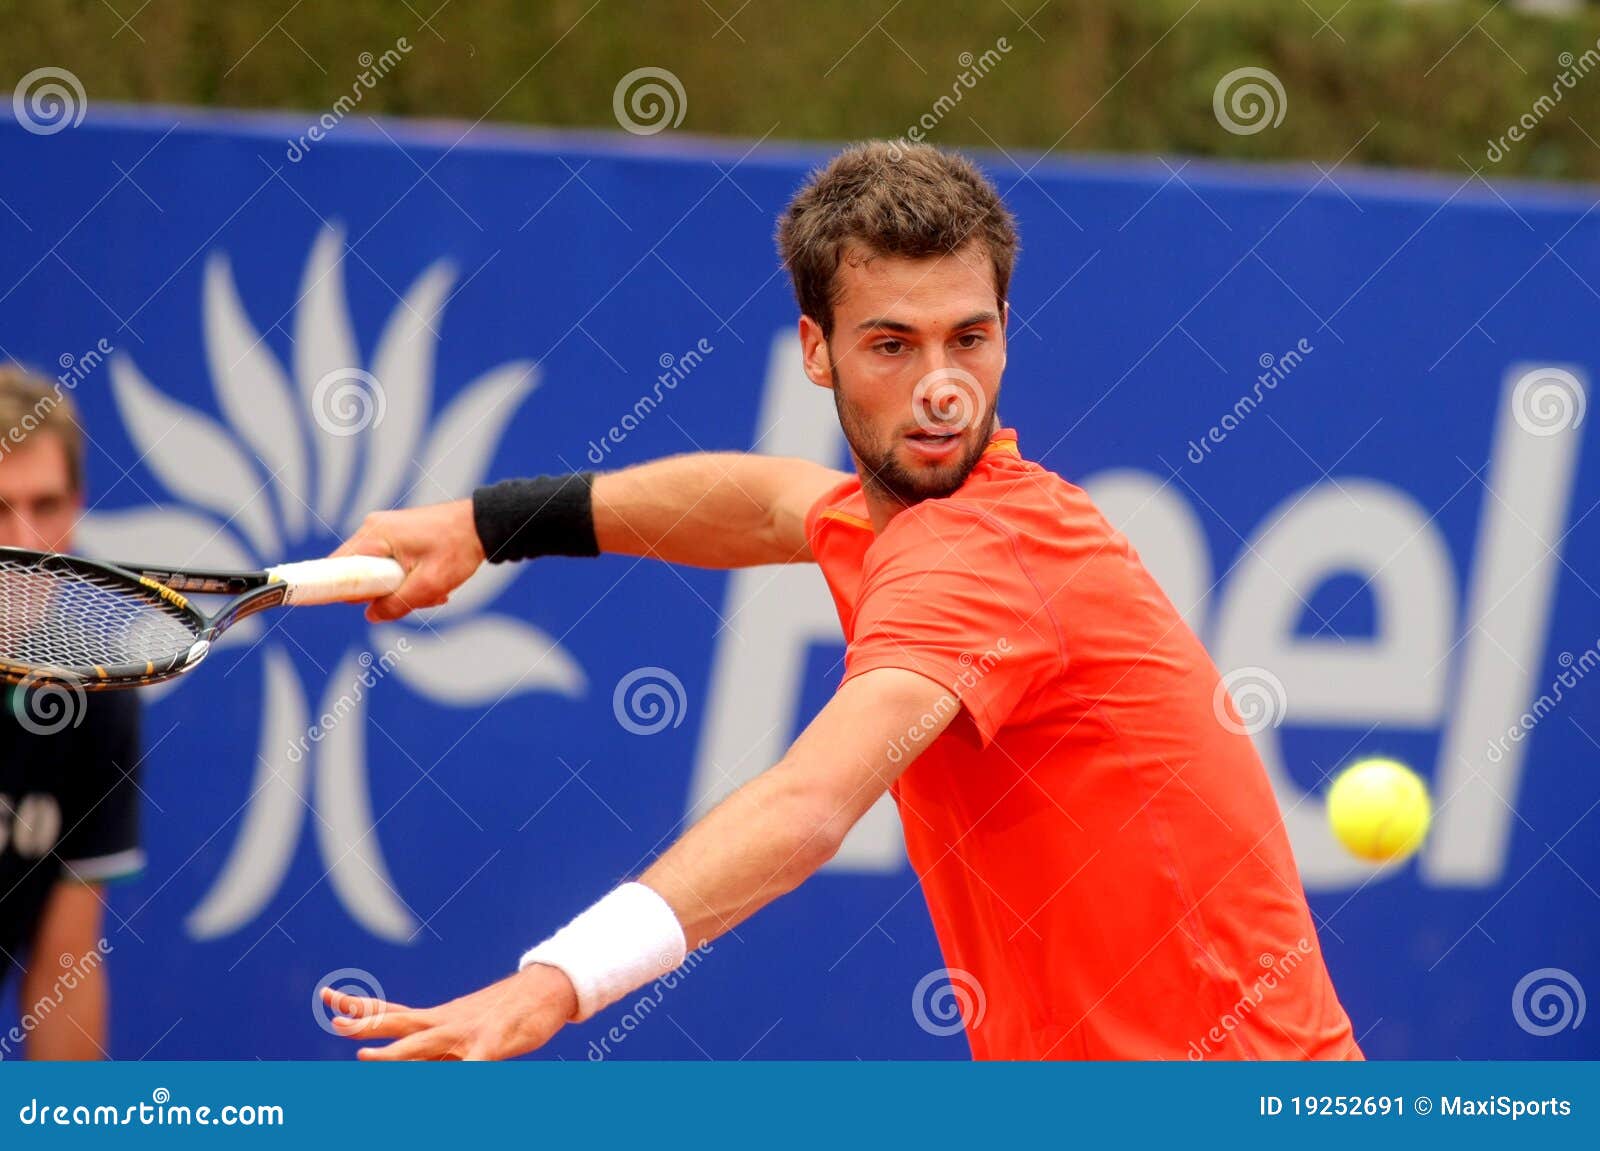 French Tennis Player Benoit Paire Editorial Photo - Image of event, tour:  19252691